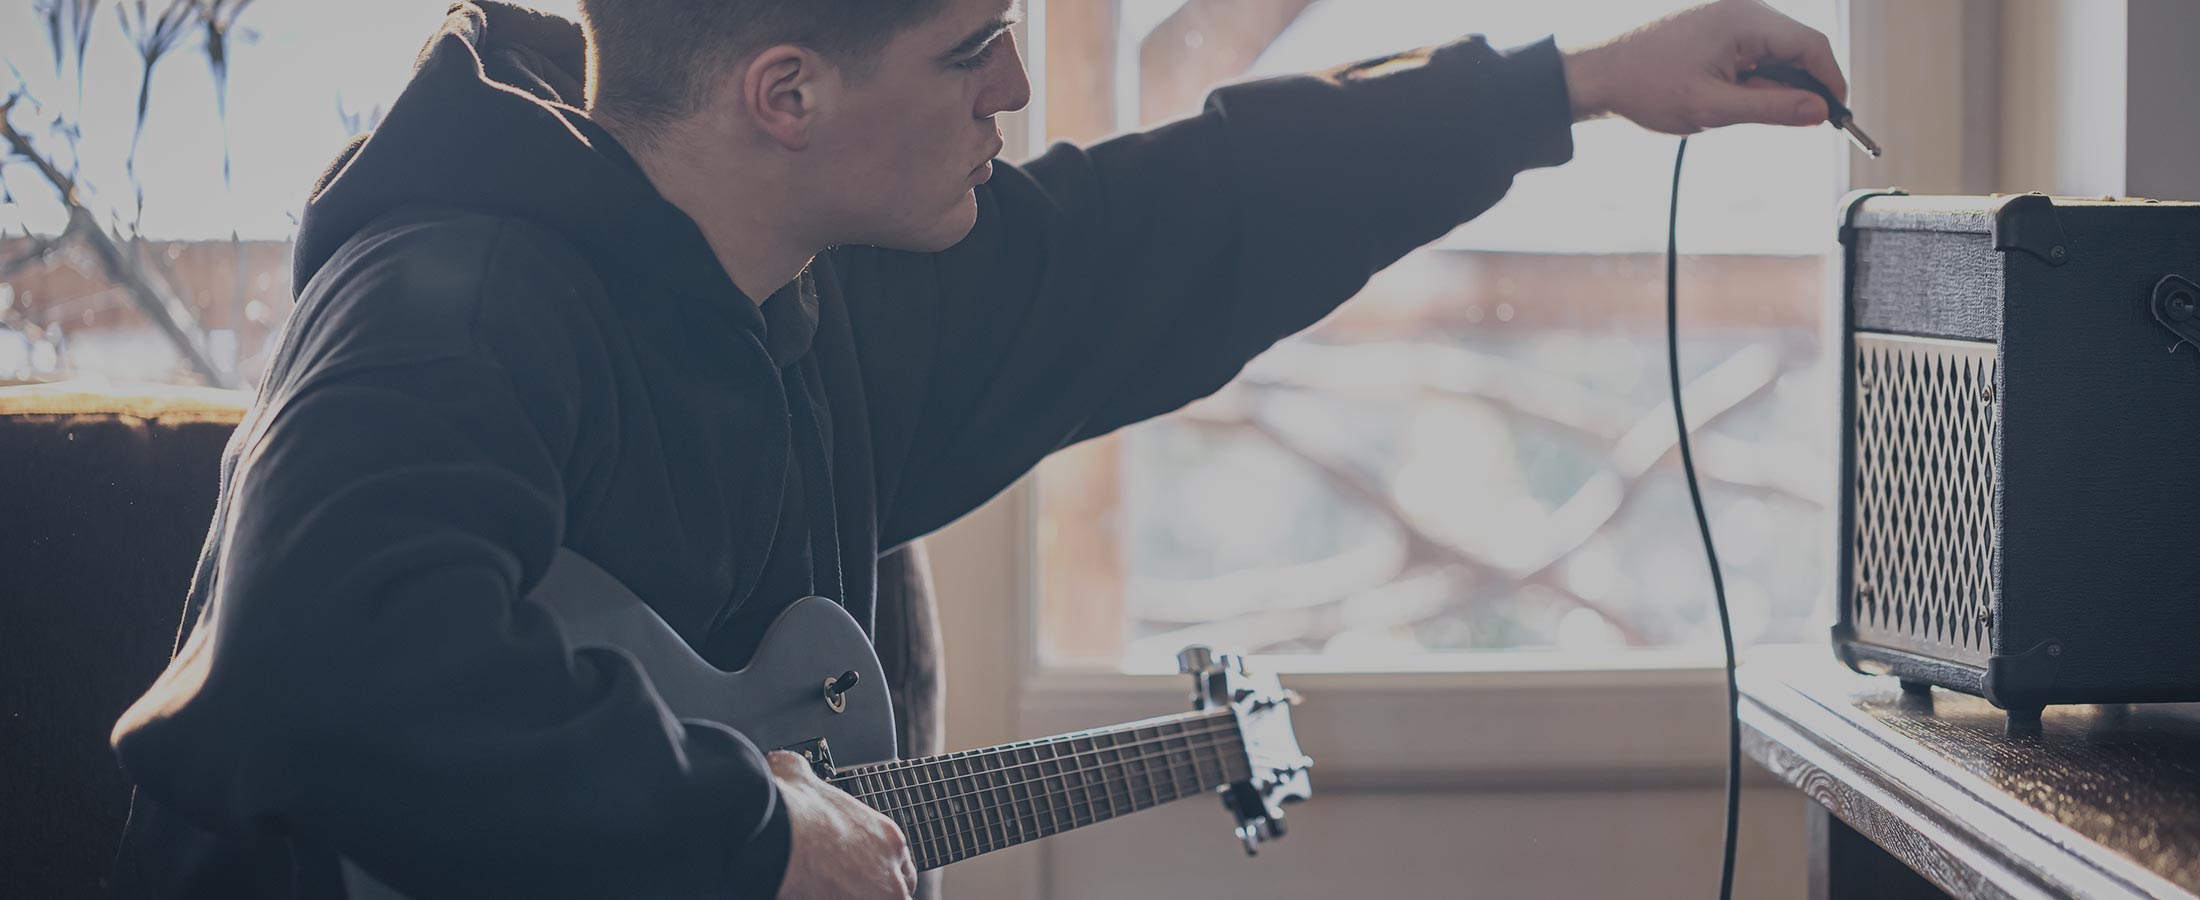 image of young man plugging guitar into amp